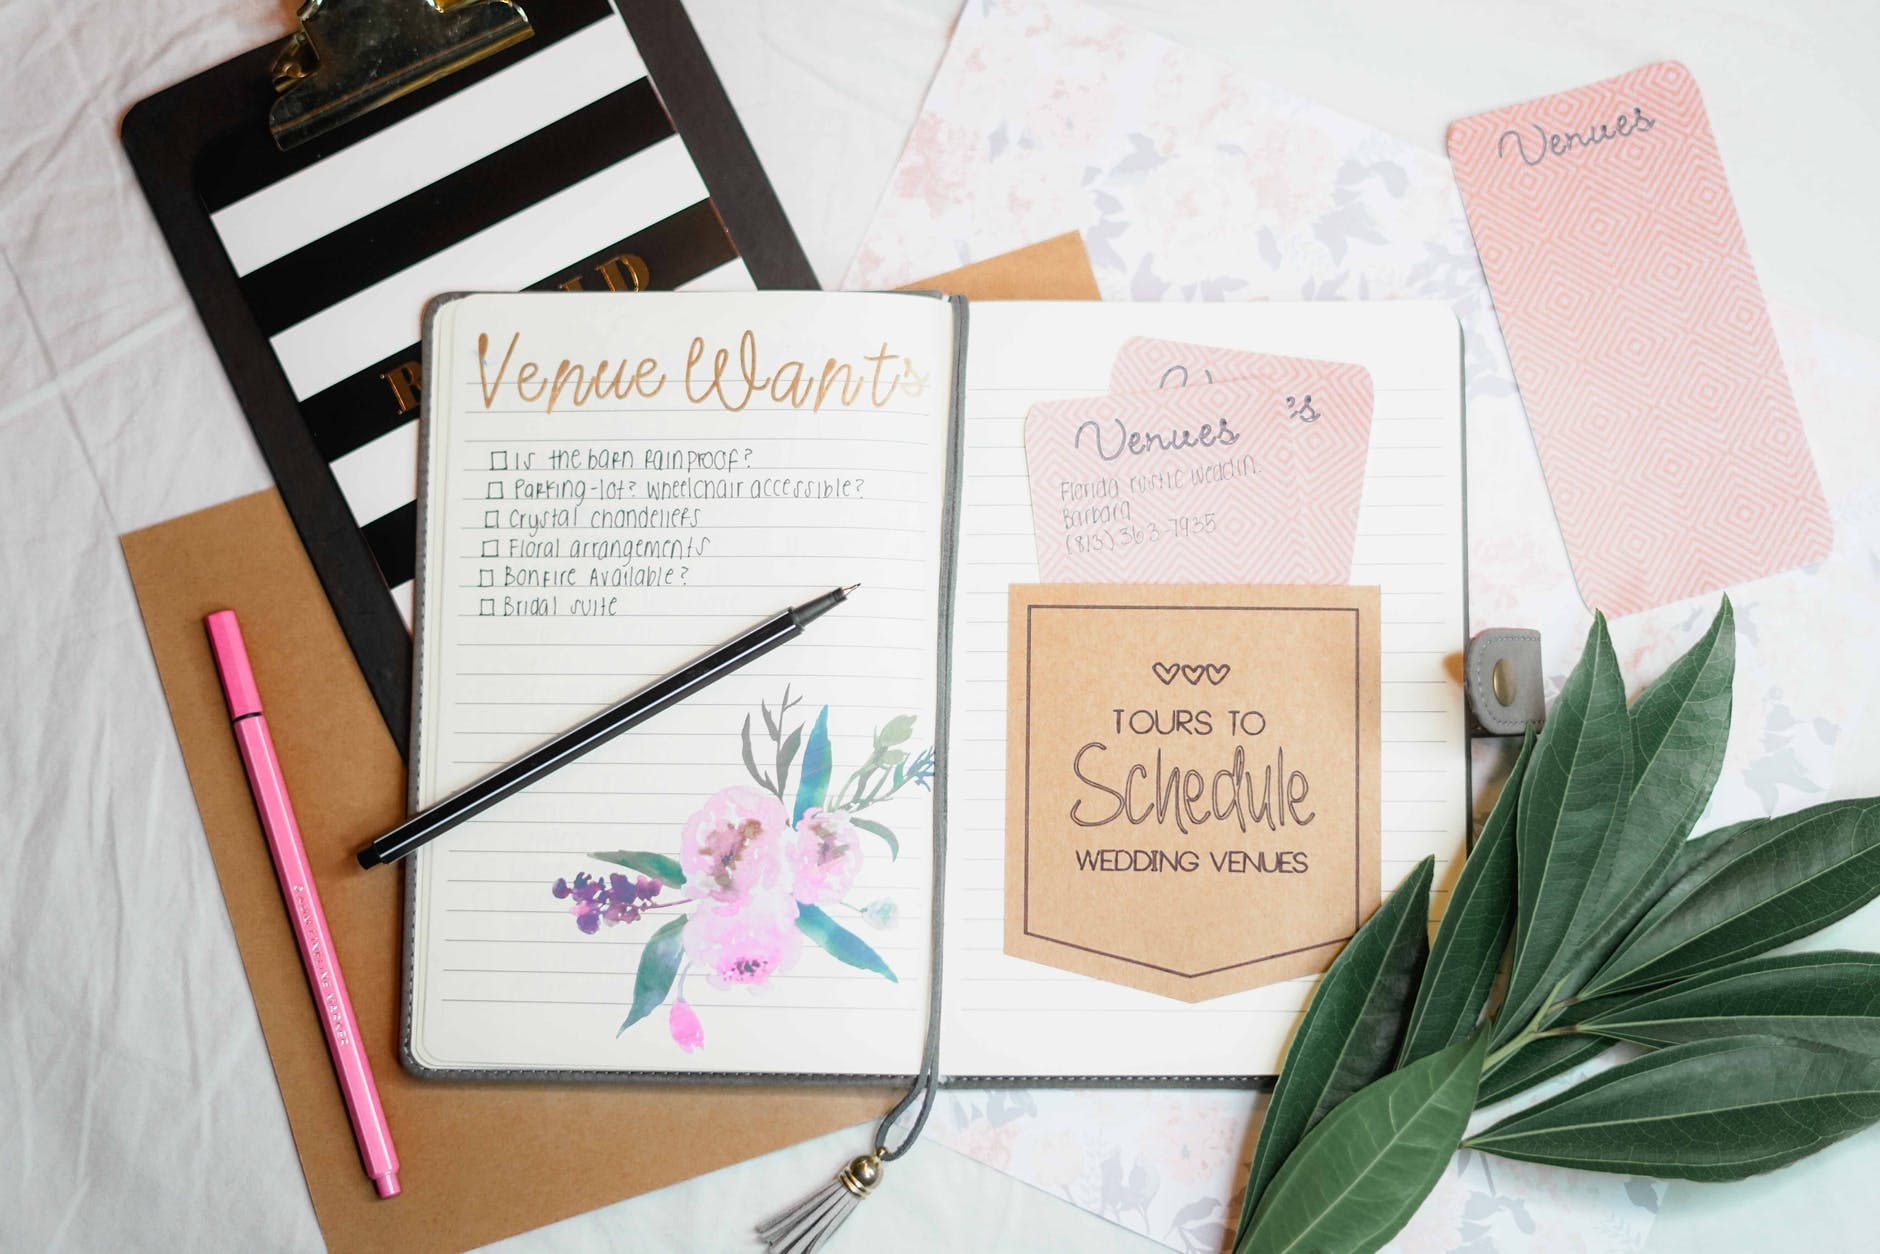 Hacks To Stay Organized When Planning A Wedding